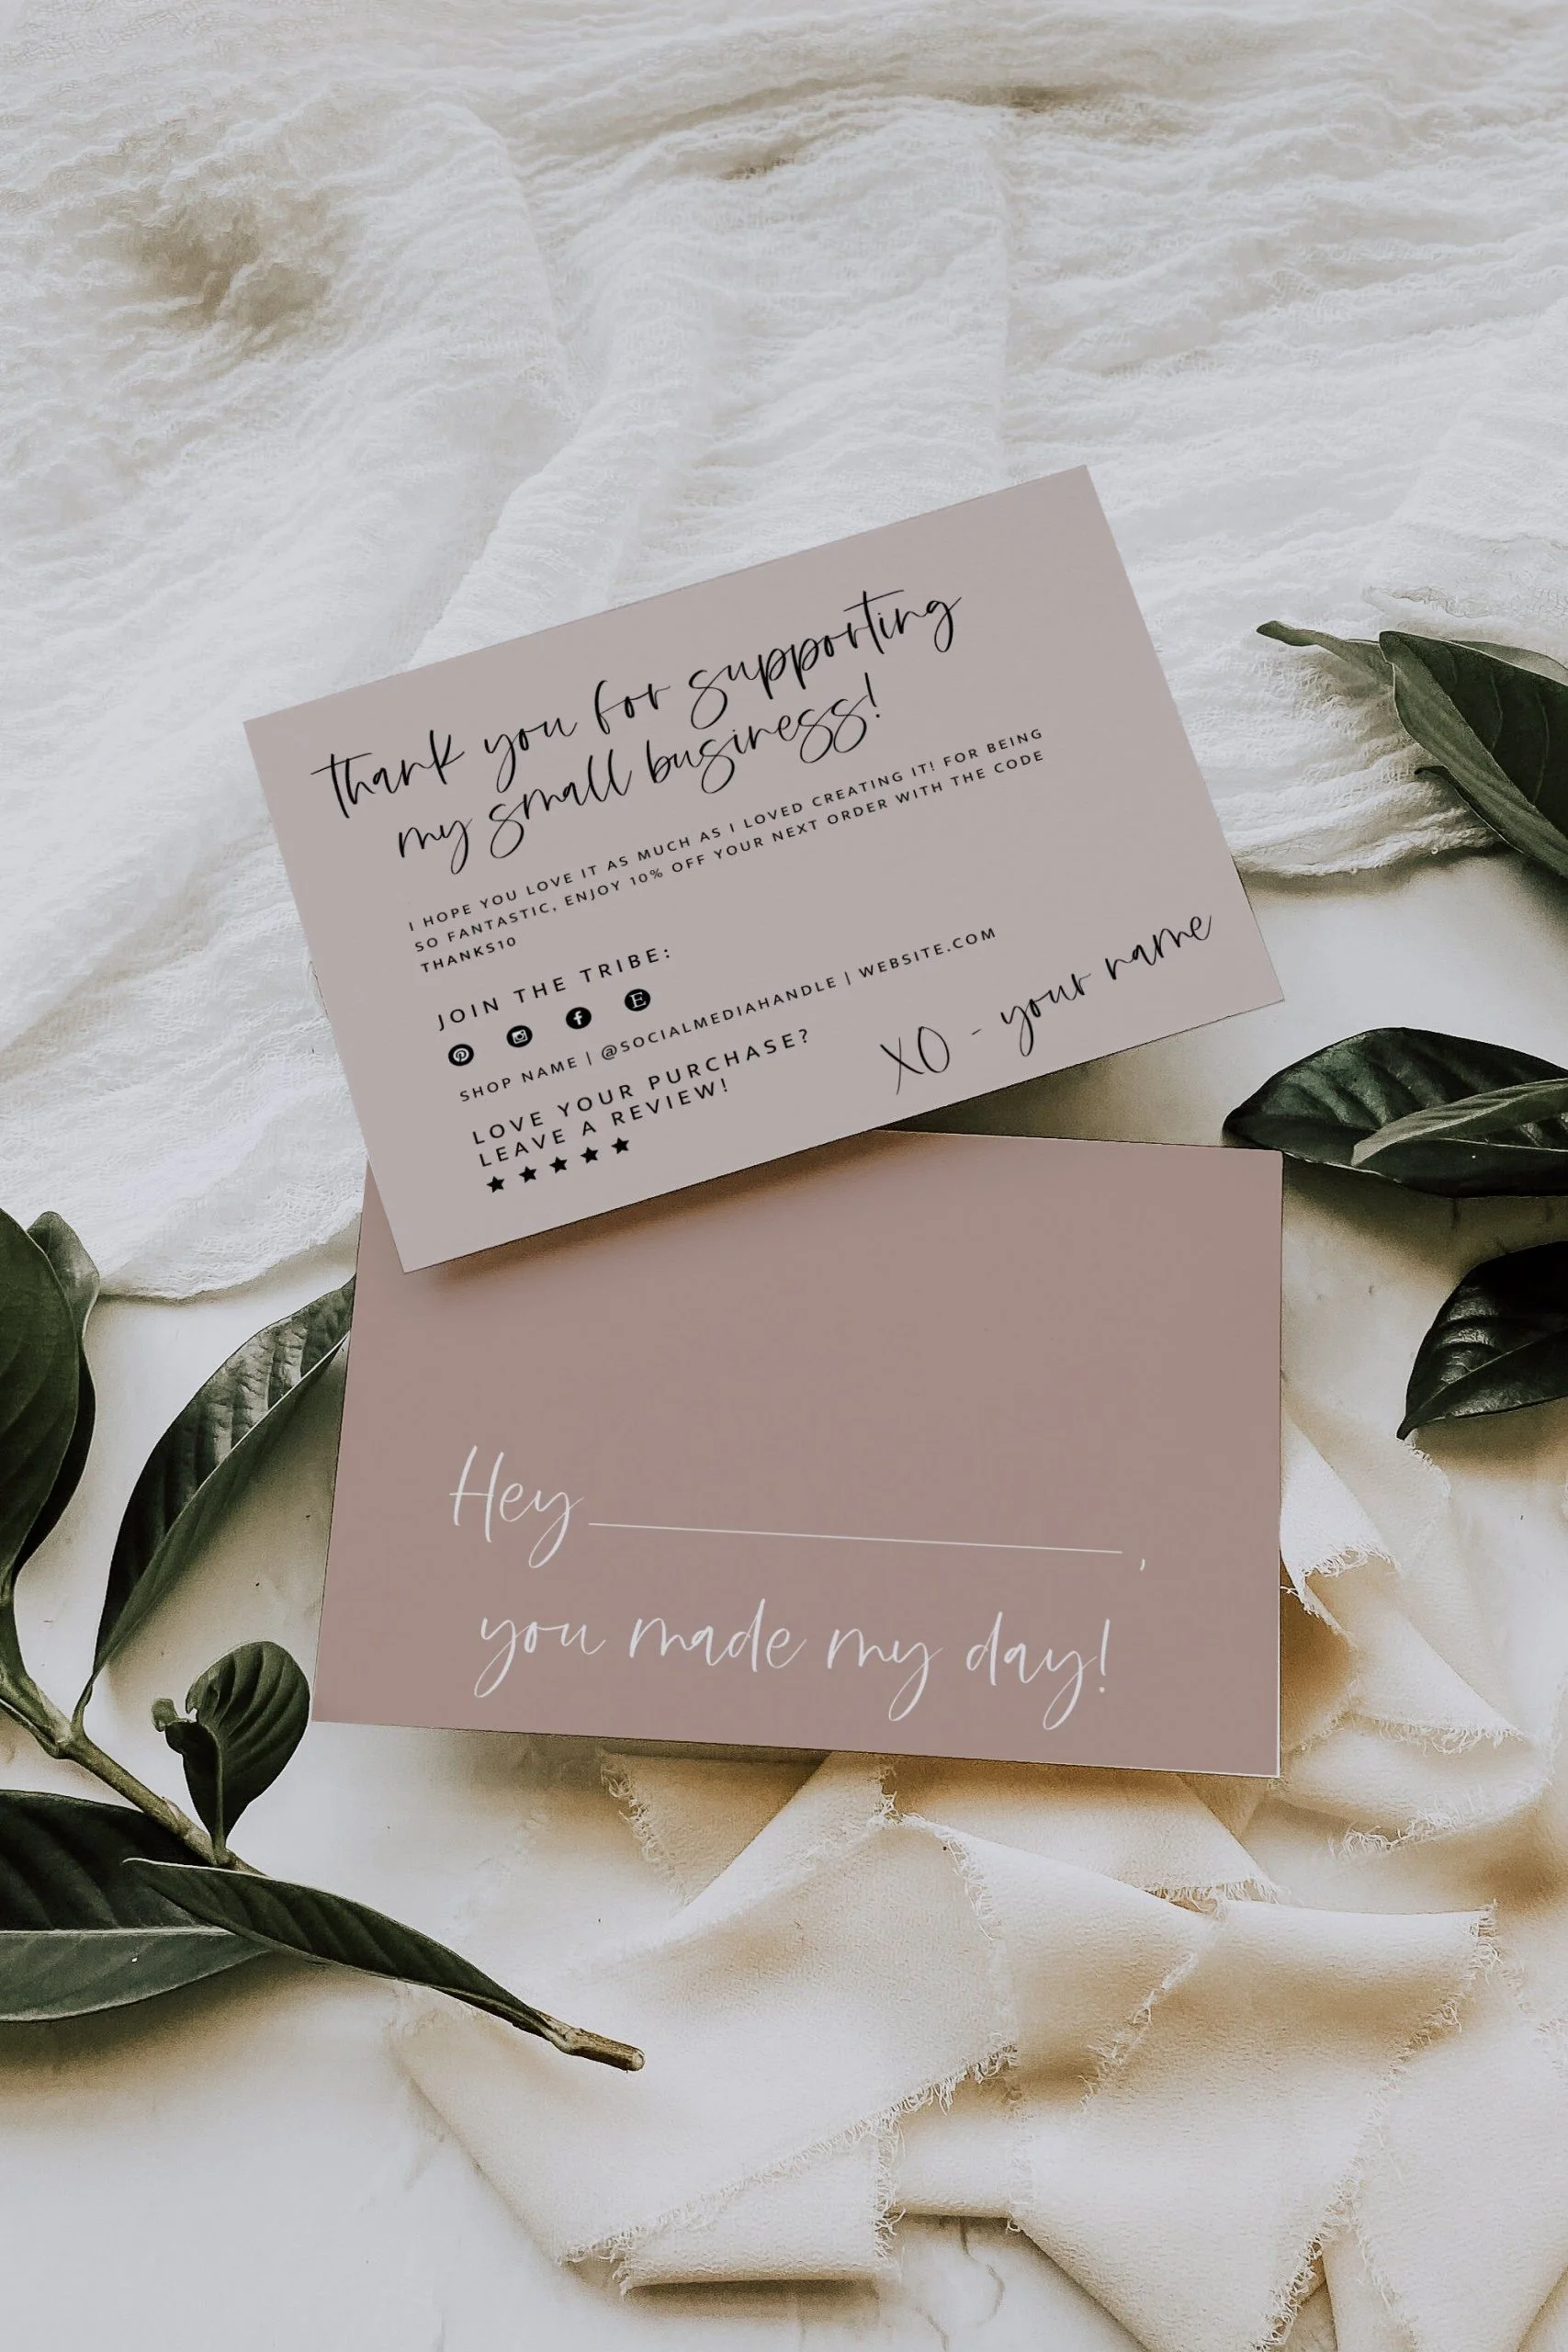 Sample Thank You Note for Business